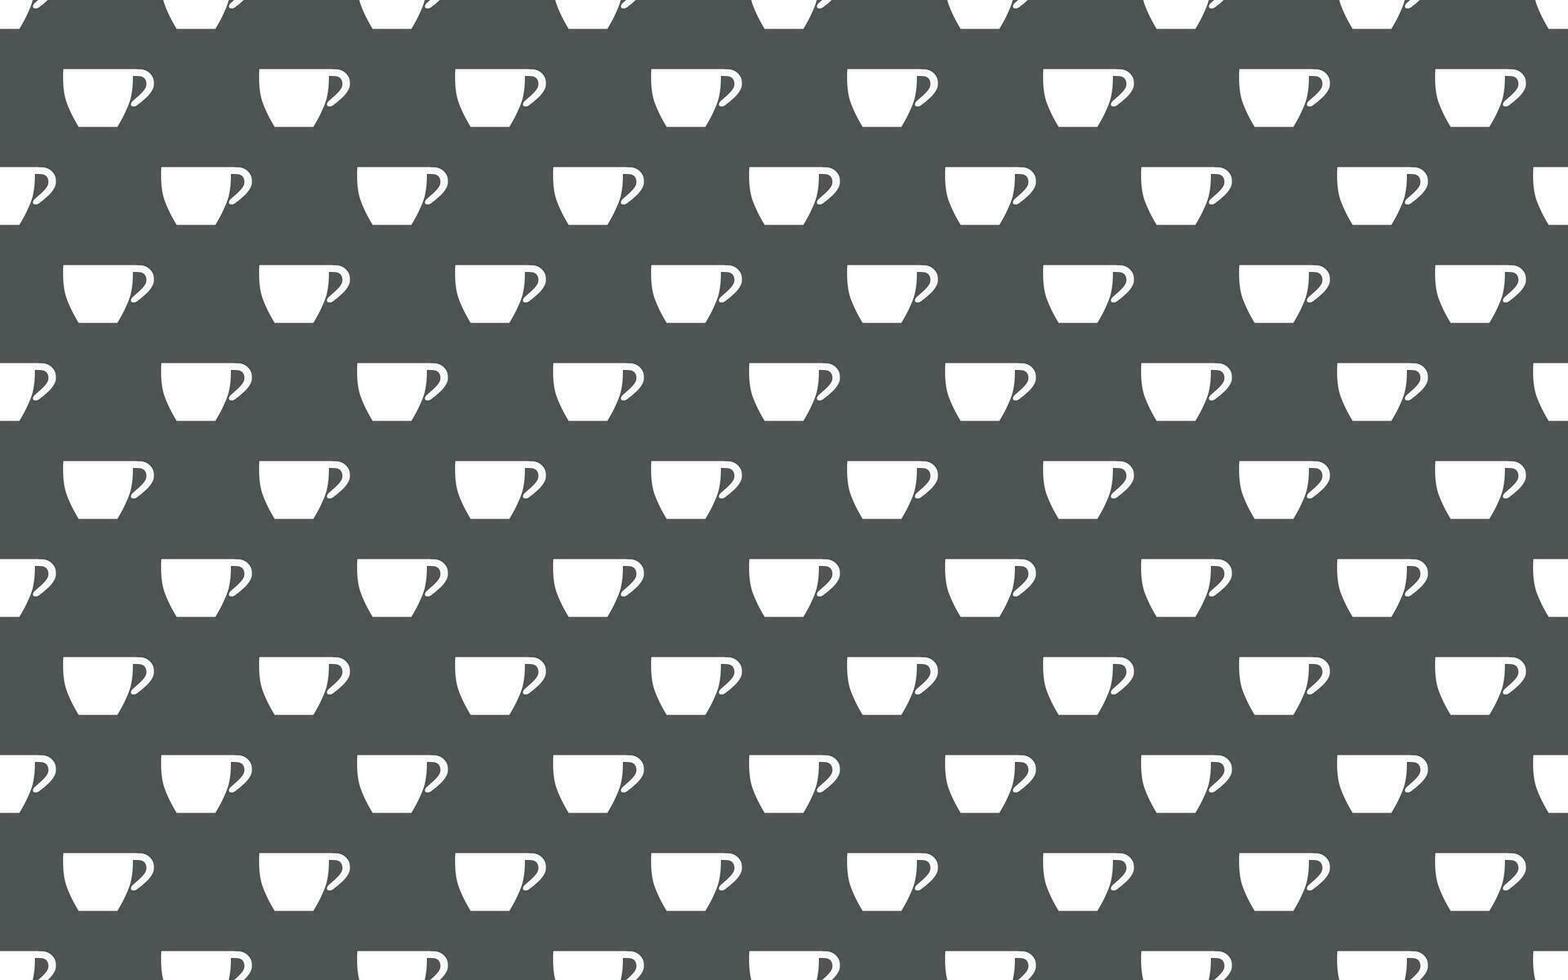 Simple vector coffee background. Seamless pattern with coffee cups on grey background. Repetitive geometric coffee icons